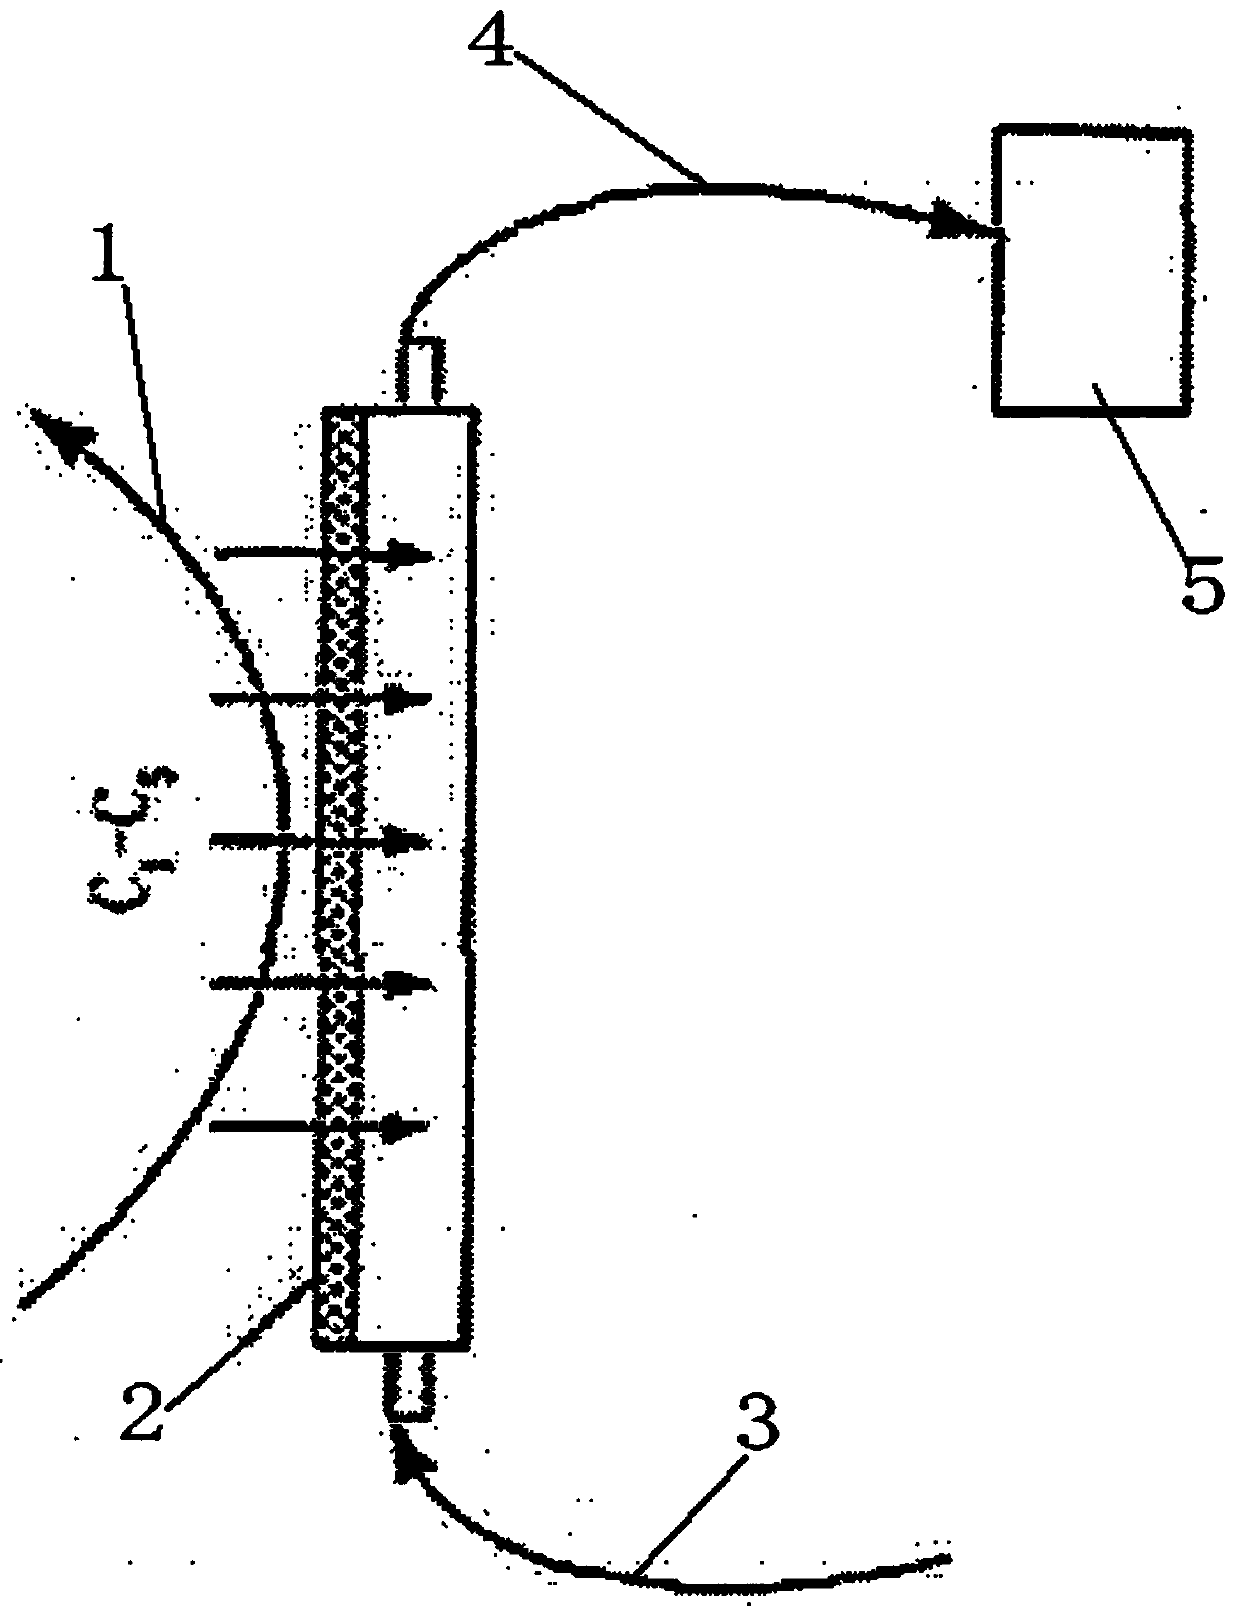 A Downhole Oil and Gas Detection Method Based on Electronic Nose